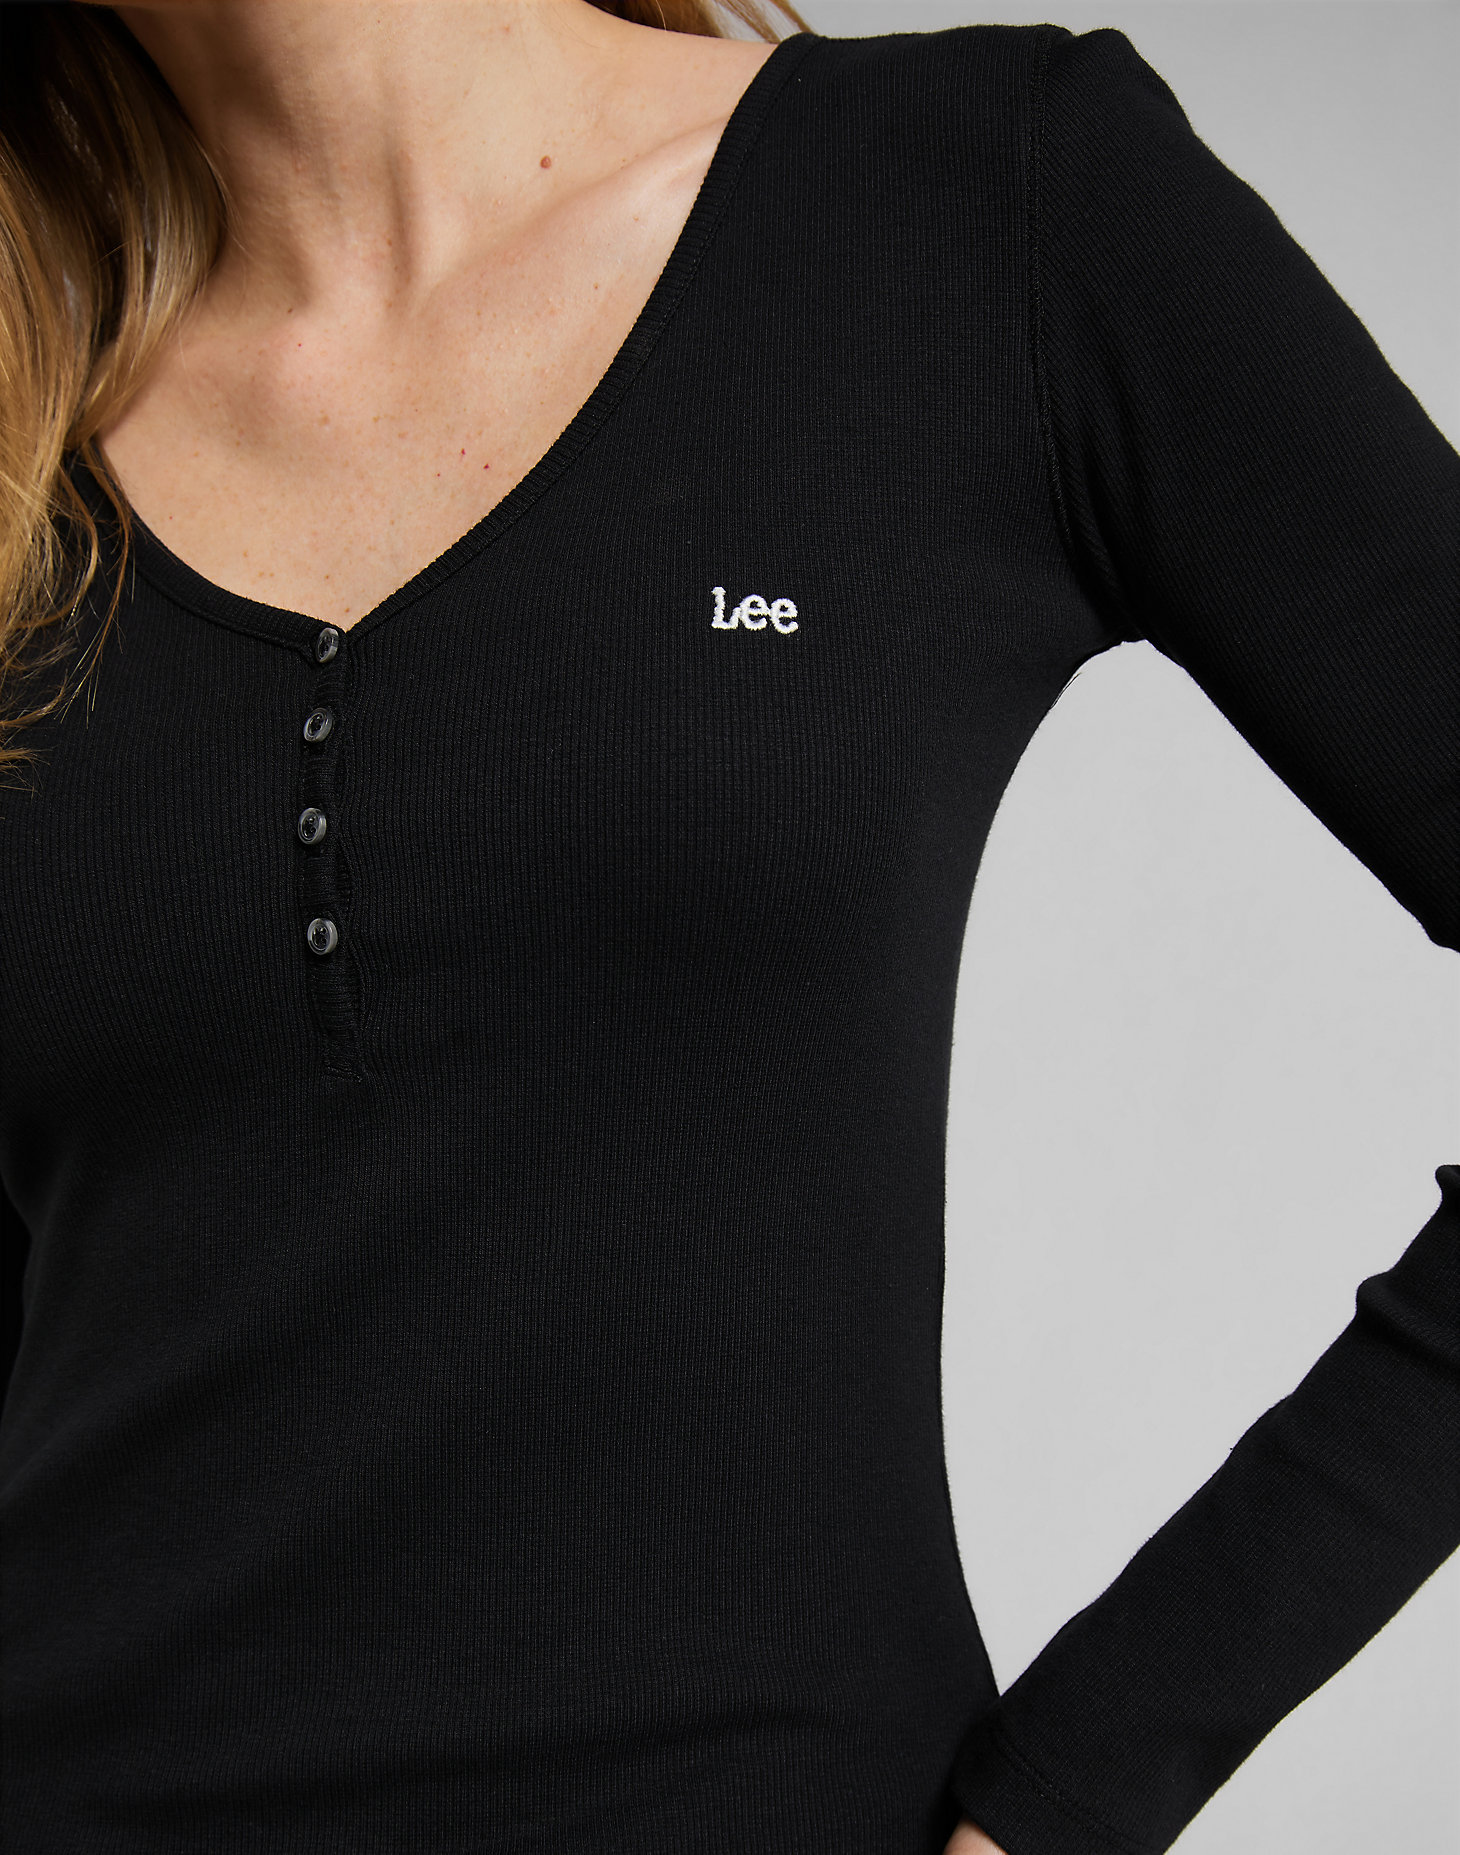 Ribbed Long Sleeve Henley in Black alternative view 5